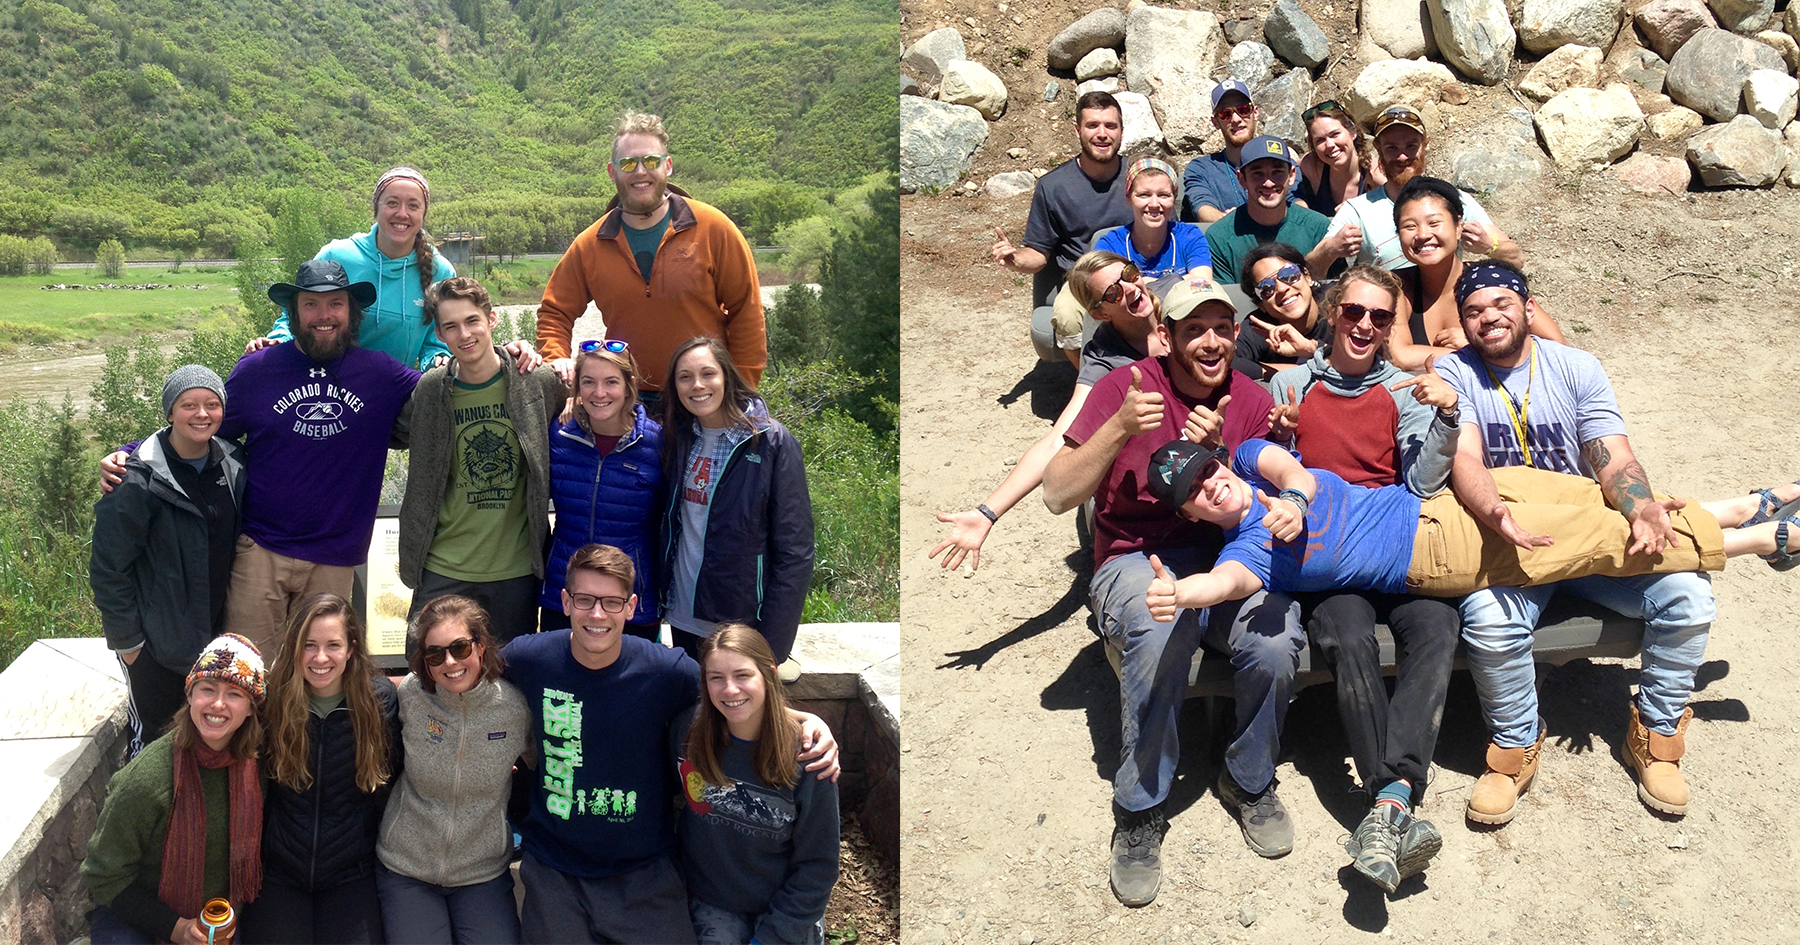 Sarah with her intern class in summer 2019 (L) and Rob with his intern class in summer 2018 (R).